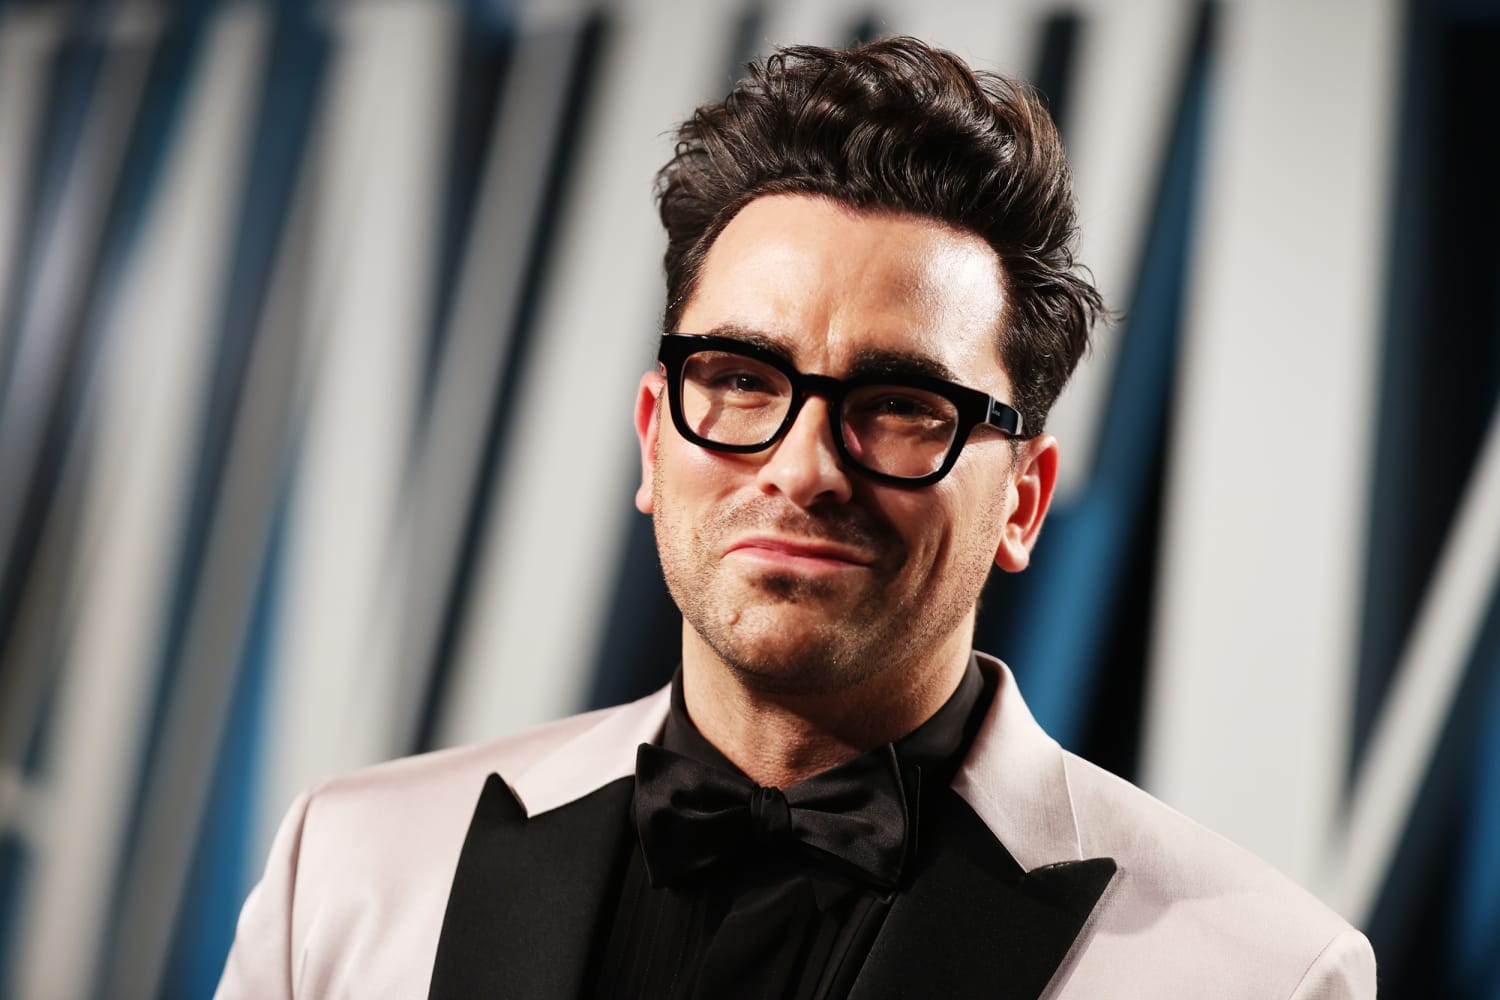 Dan Levy to reality cooking series on HBO